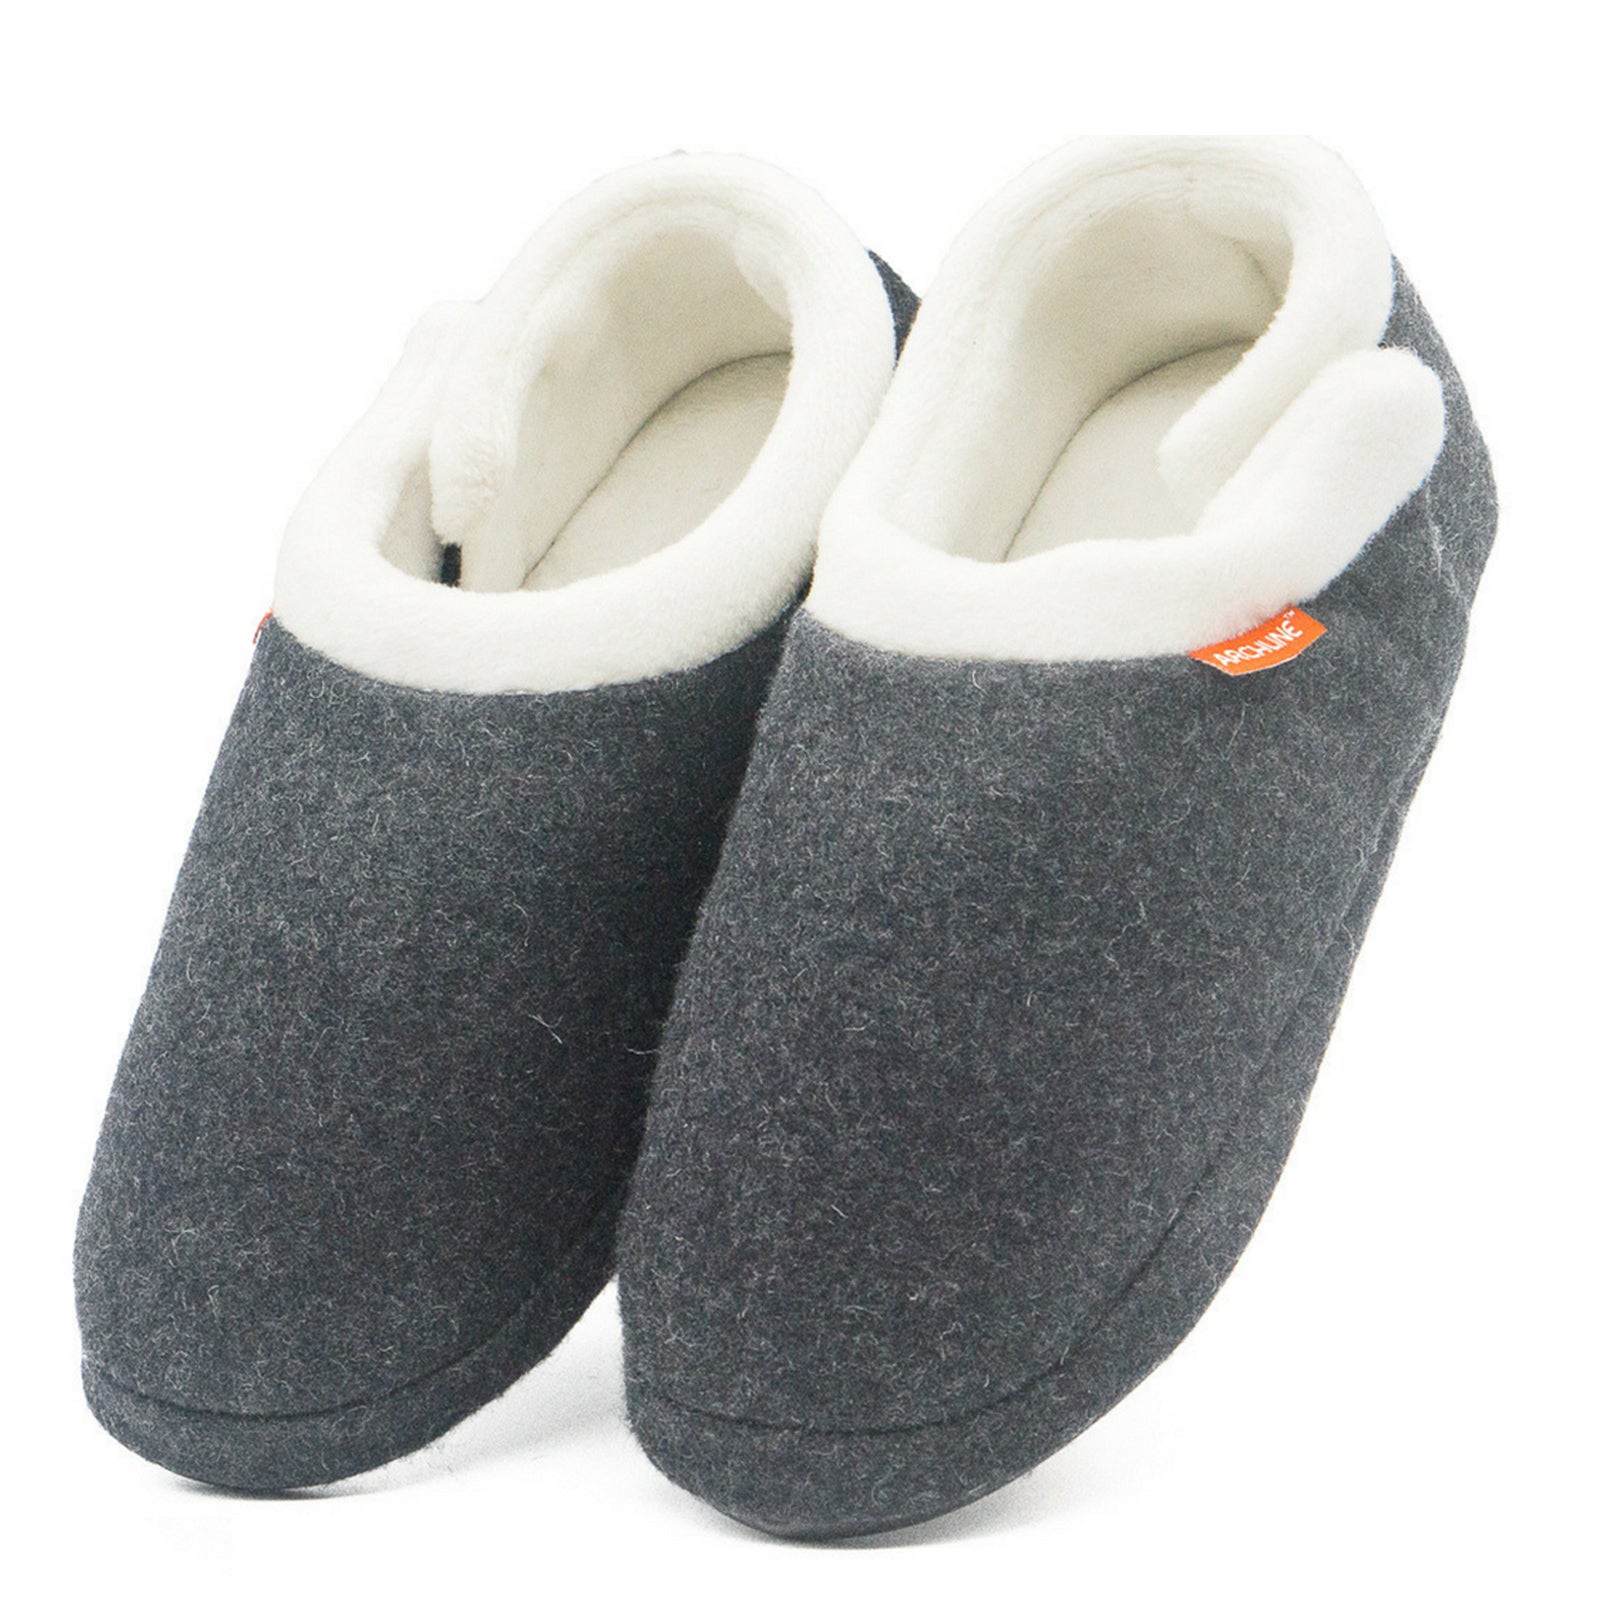 Orthotic Slippers CLOSED Arch Scuffs Orthopedic Moccasins Shoes - Grey Marle - EUR 37